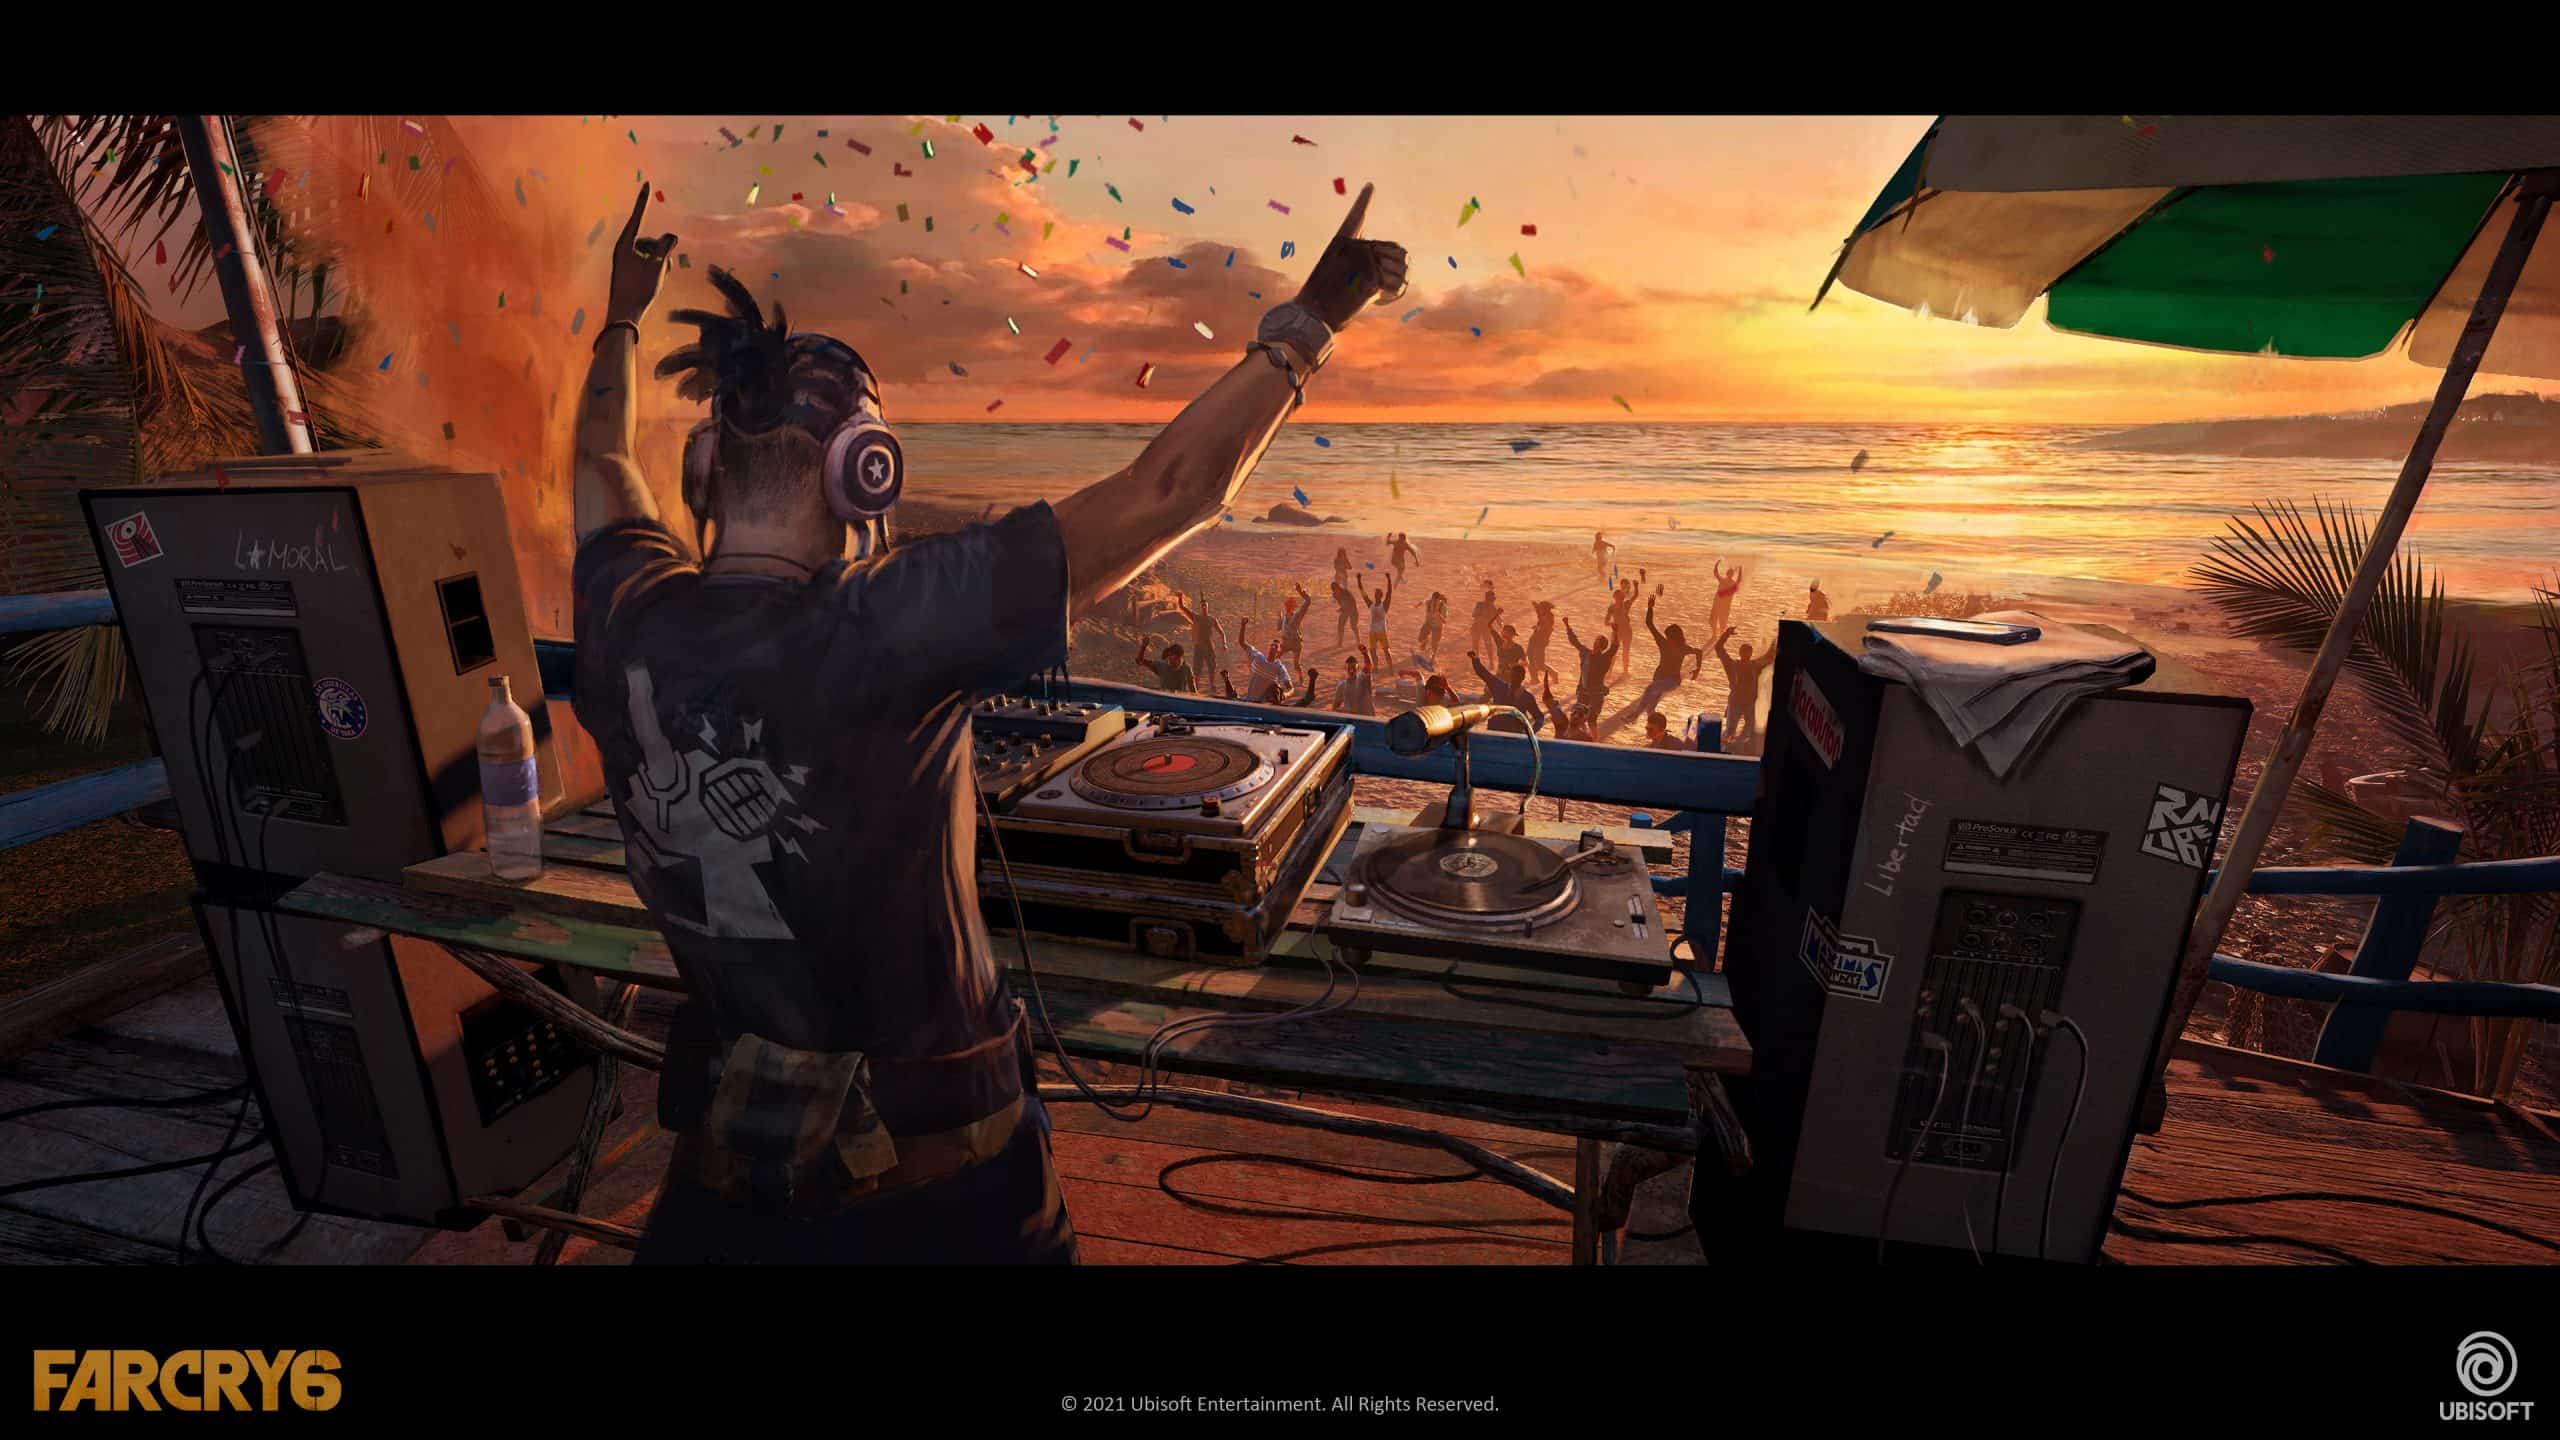 Art of DJ playing for crowd at beach